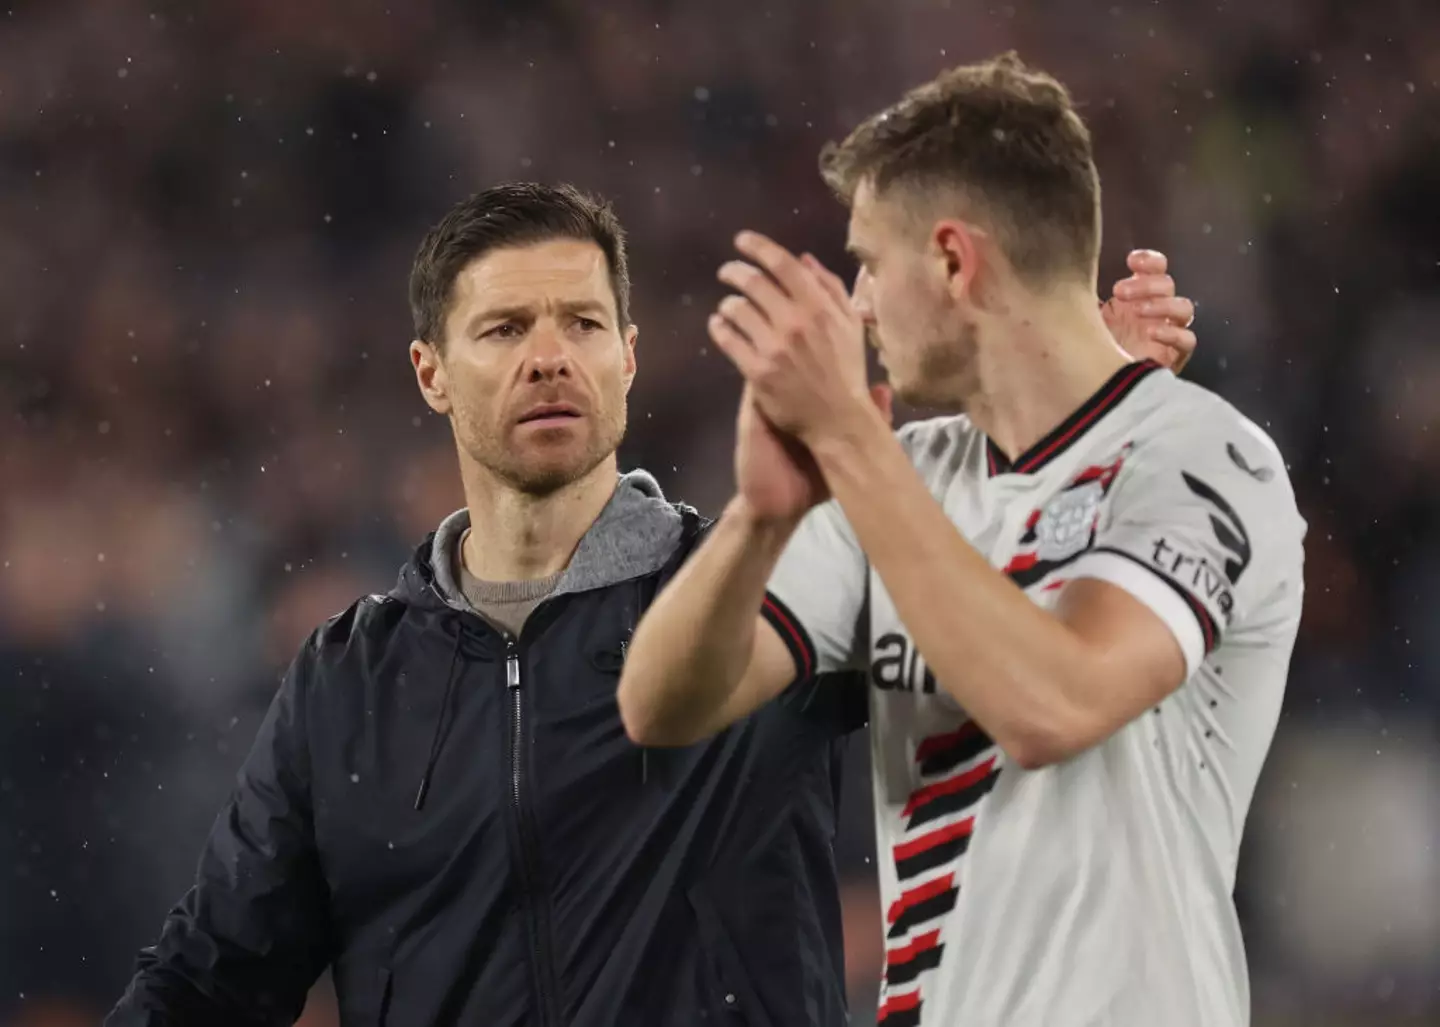 Leverkusen are through to the final four of the Europa League (Image: Getty)